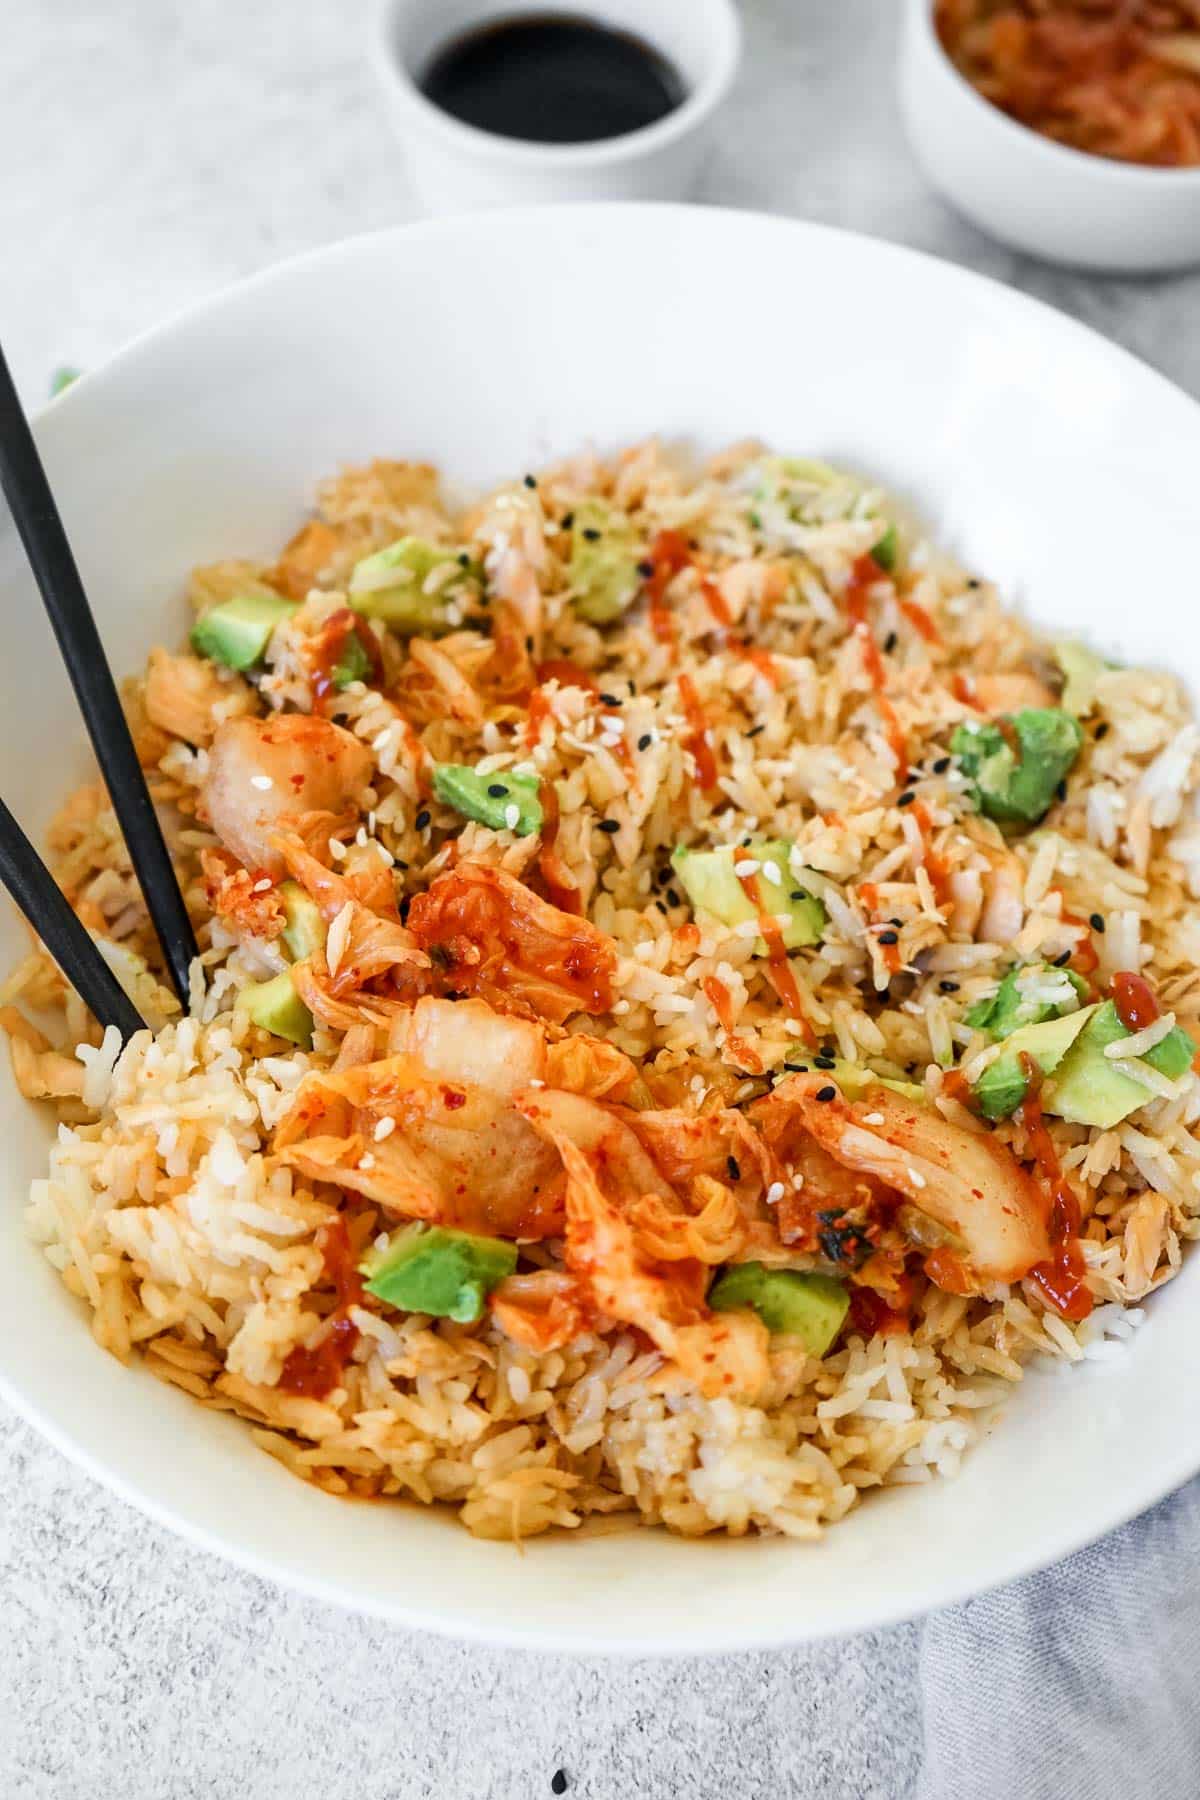 Tik Tok Salmon and Rice in a white bowl with kimchee and chop sticks.